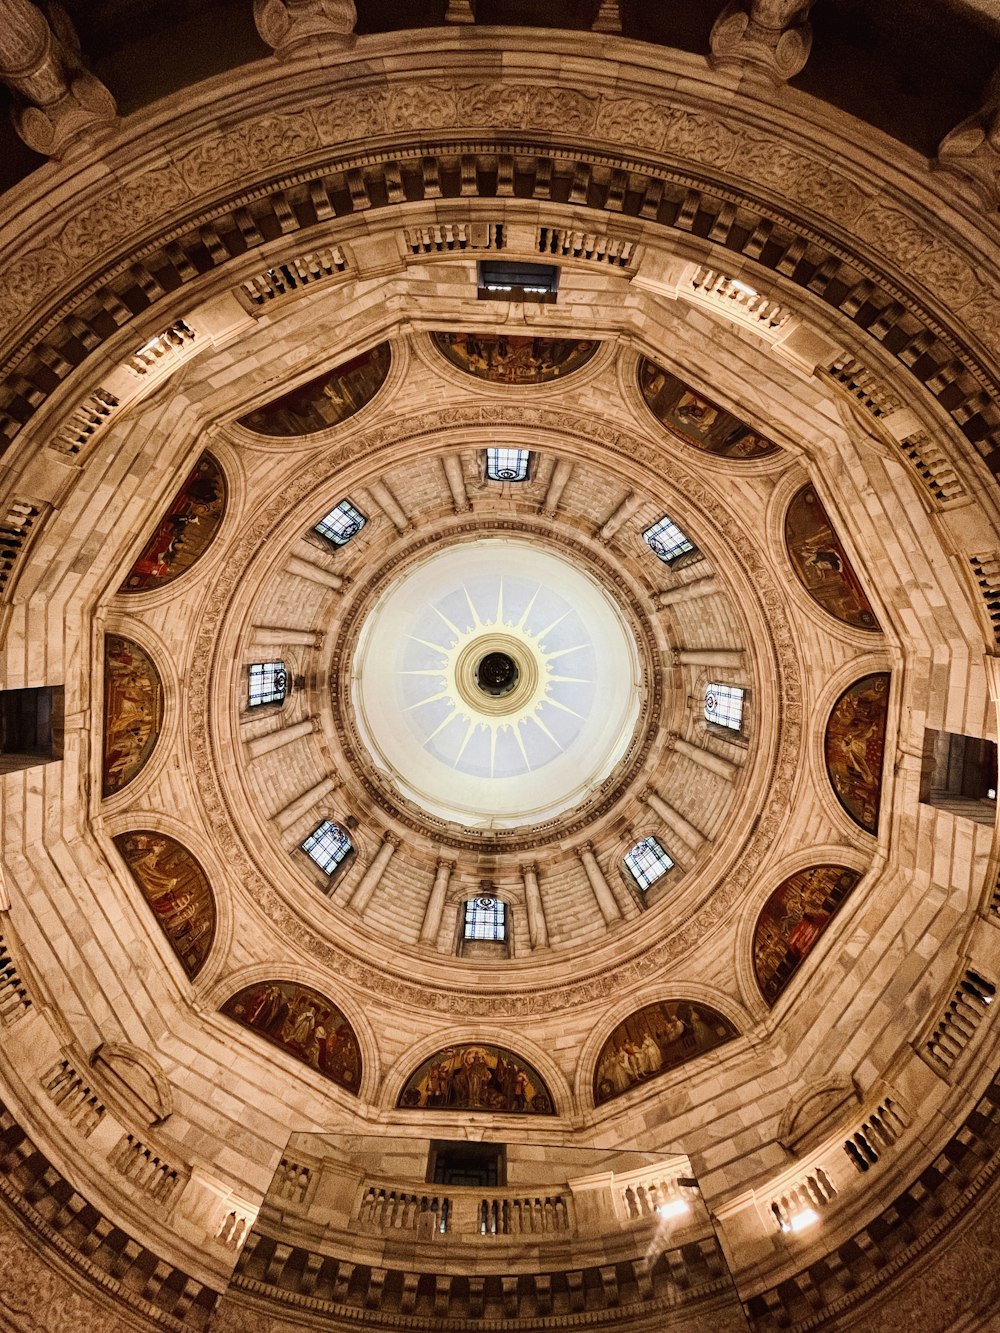 a large domed ceiling with a circular ceiling and a circular window